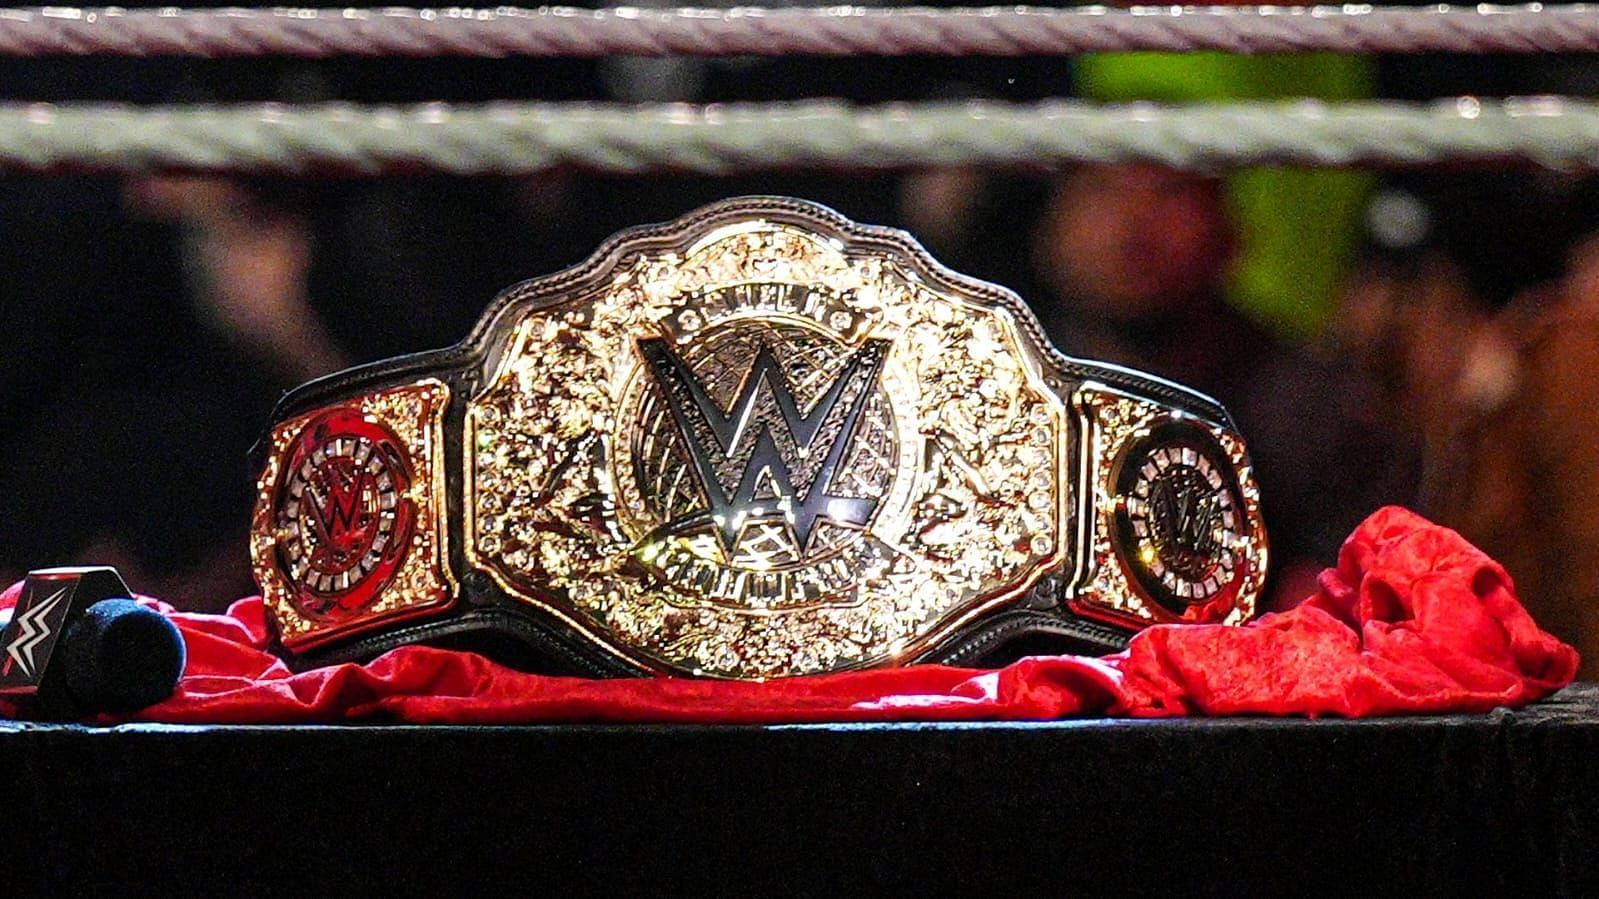 Who will capture the World Heavyweight Championship?